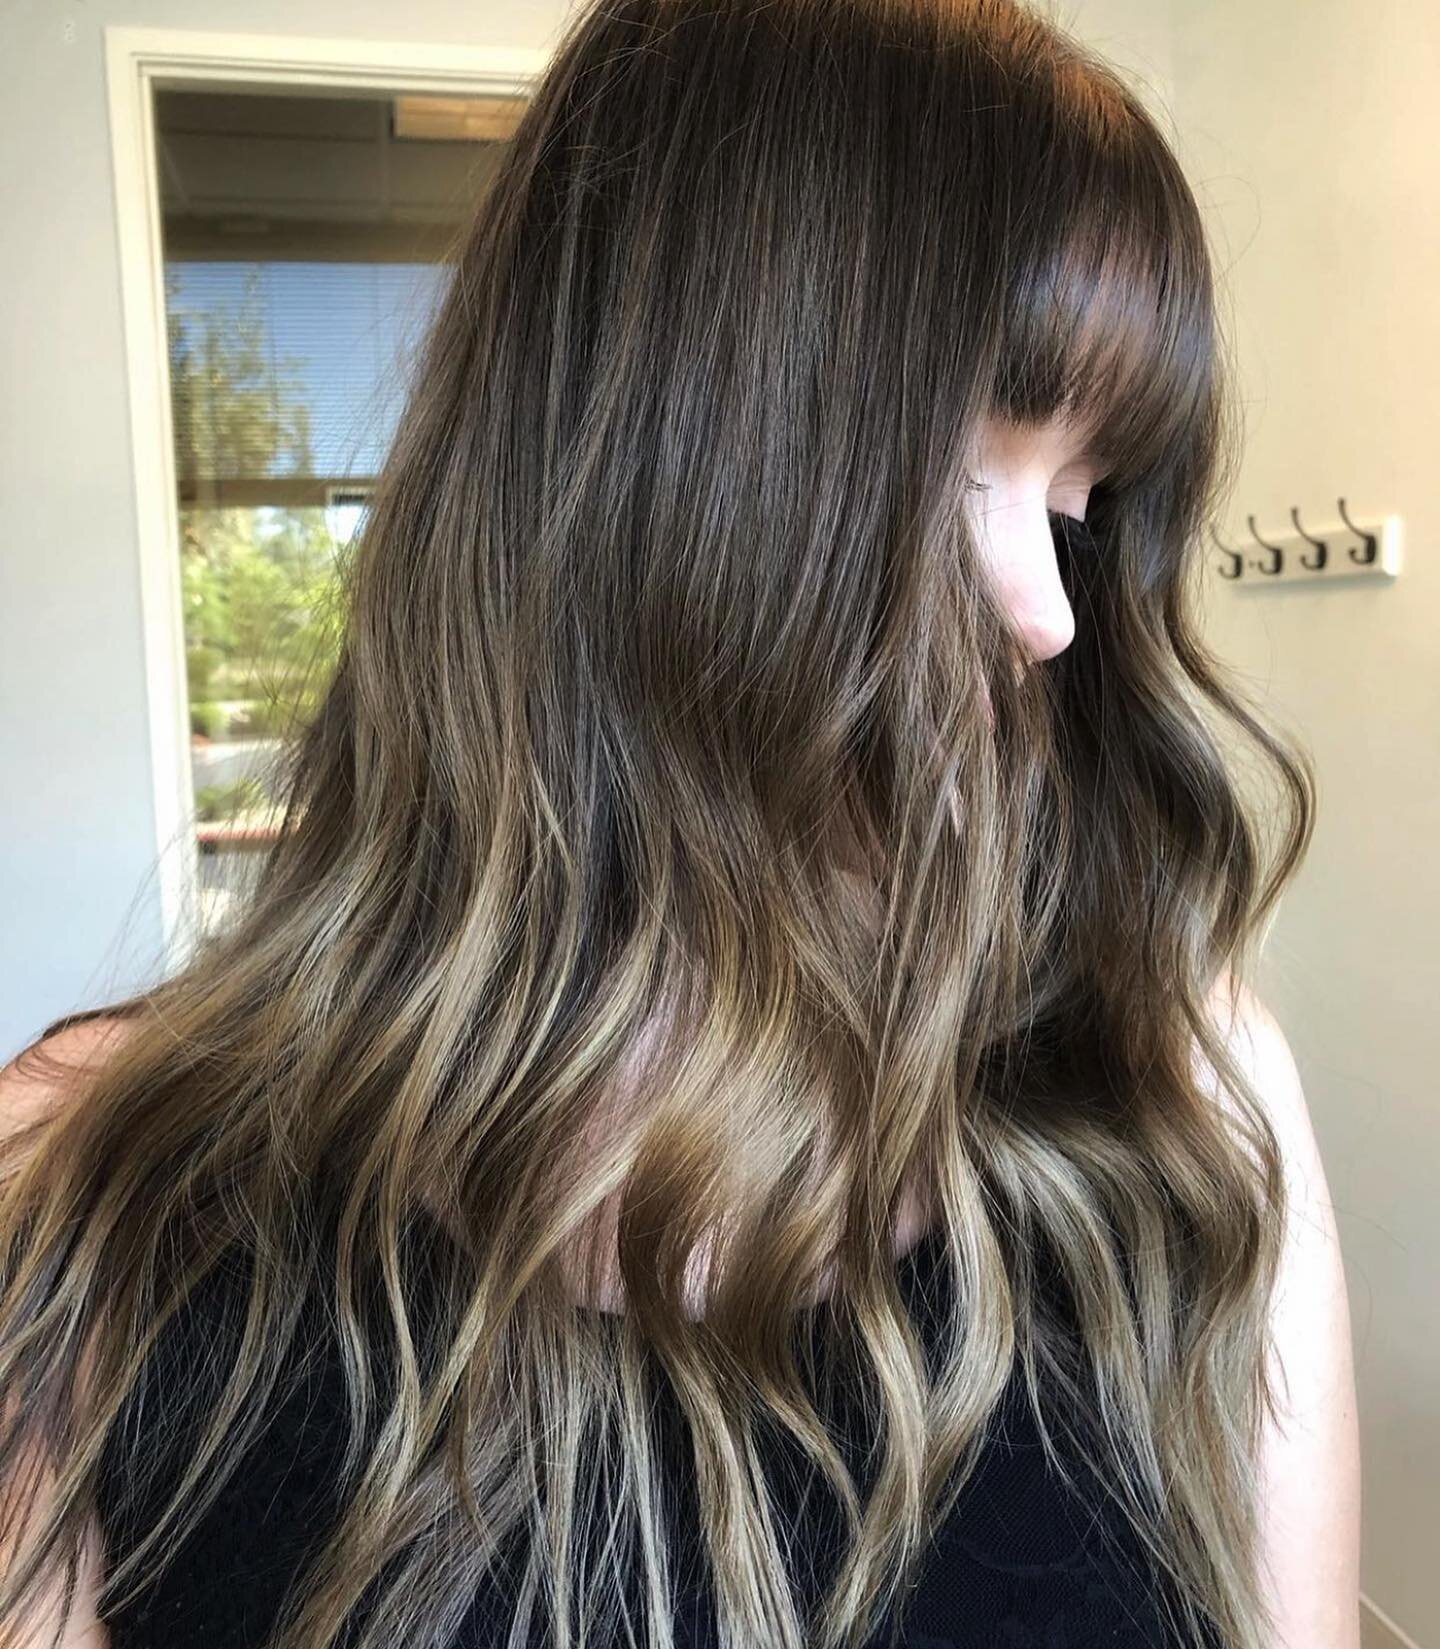 ✨feeling ready for fall and those darker tones✨
By @hairmama123 

Studio 55 Salons is a premier provider of private salon suites in Sacramento, Roseville and Folsom. 

#studio55salons